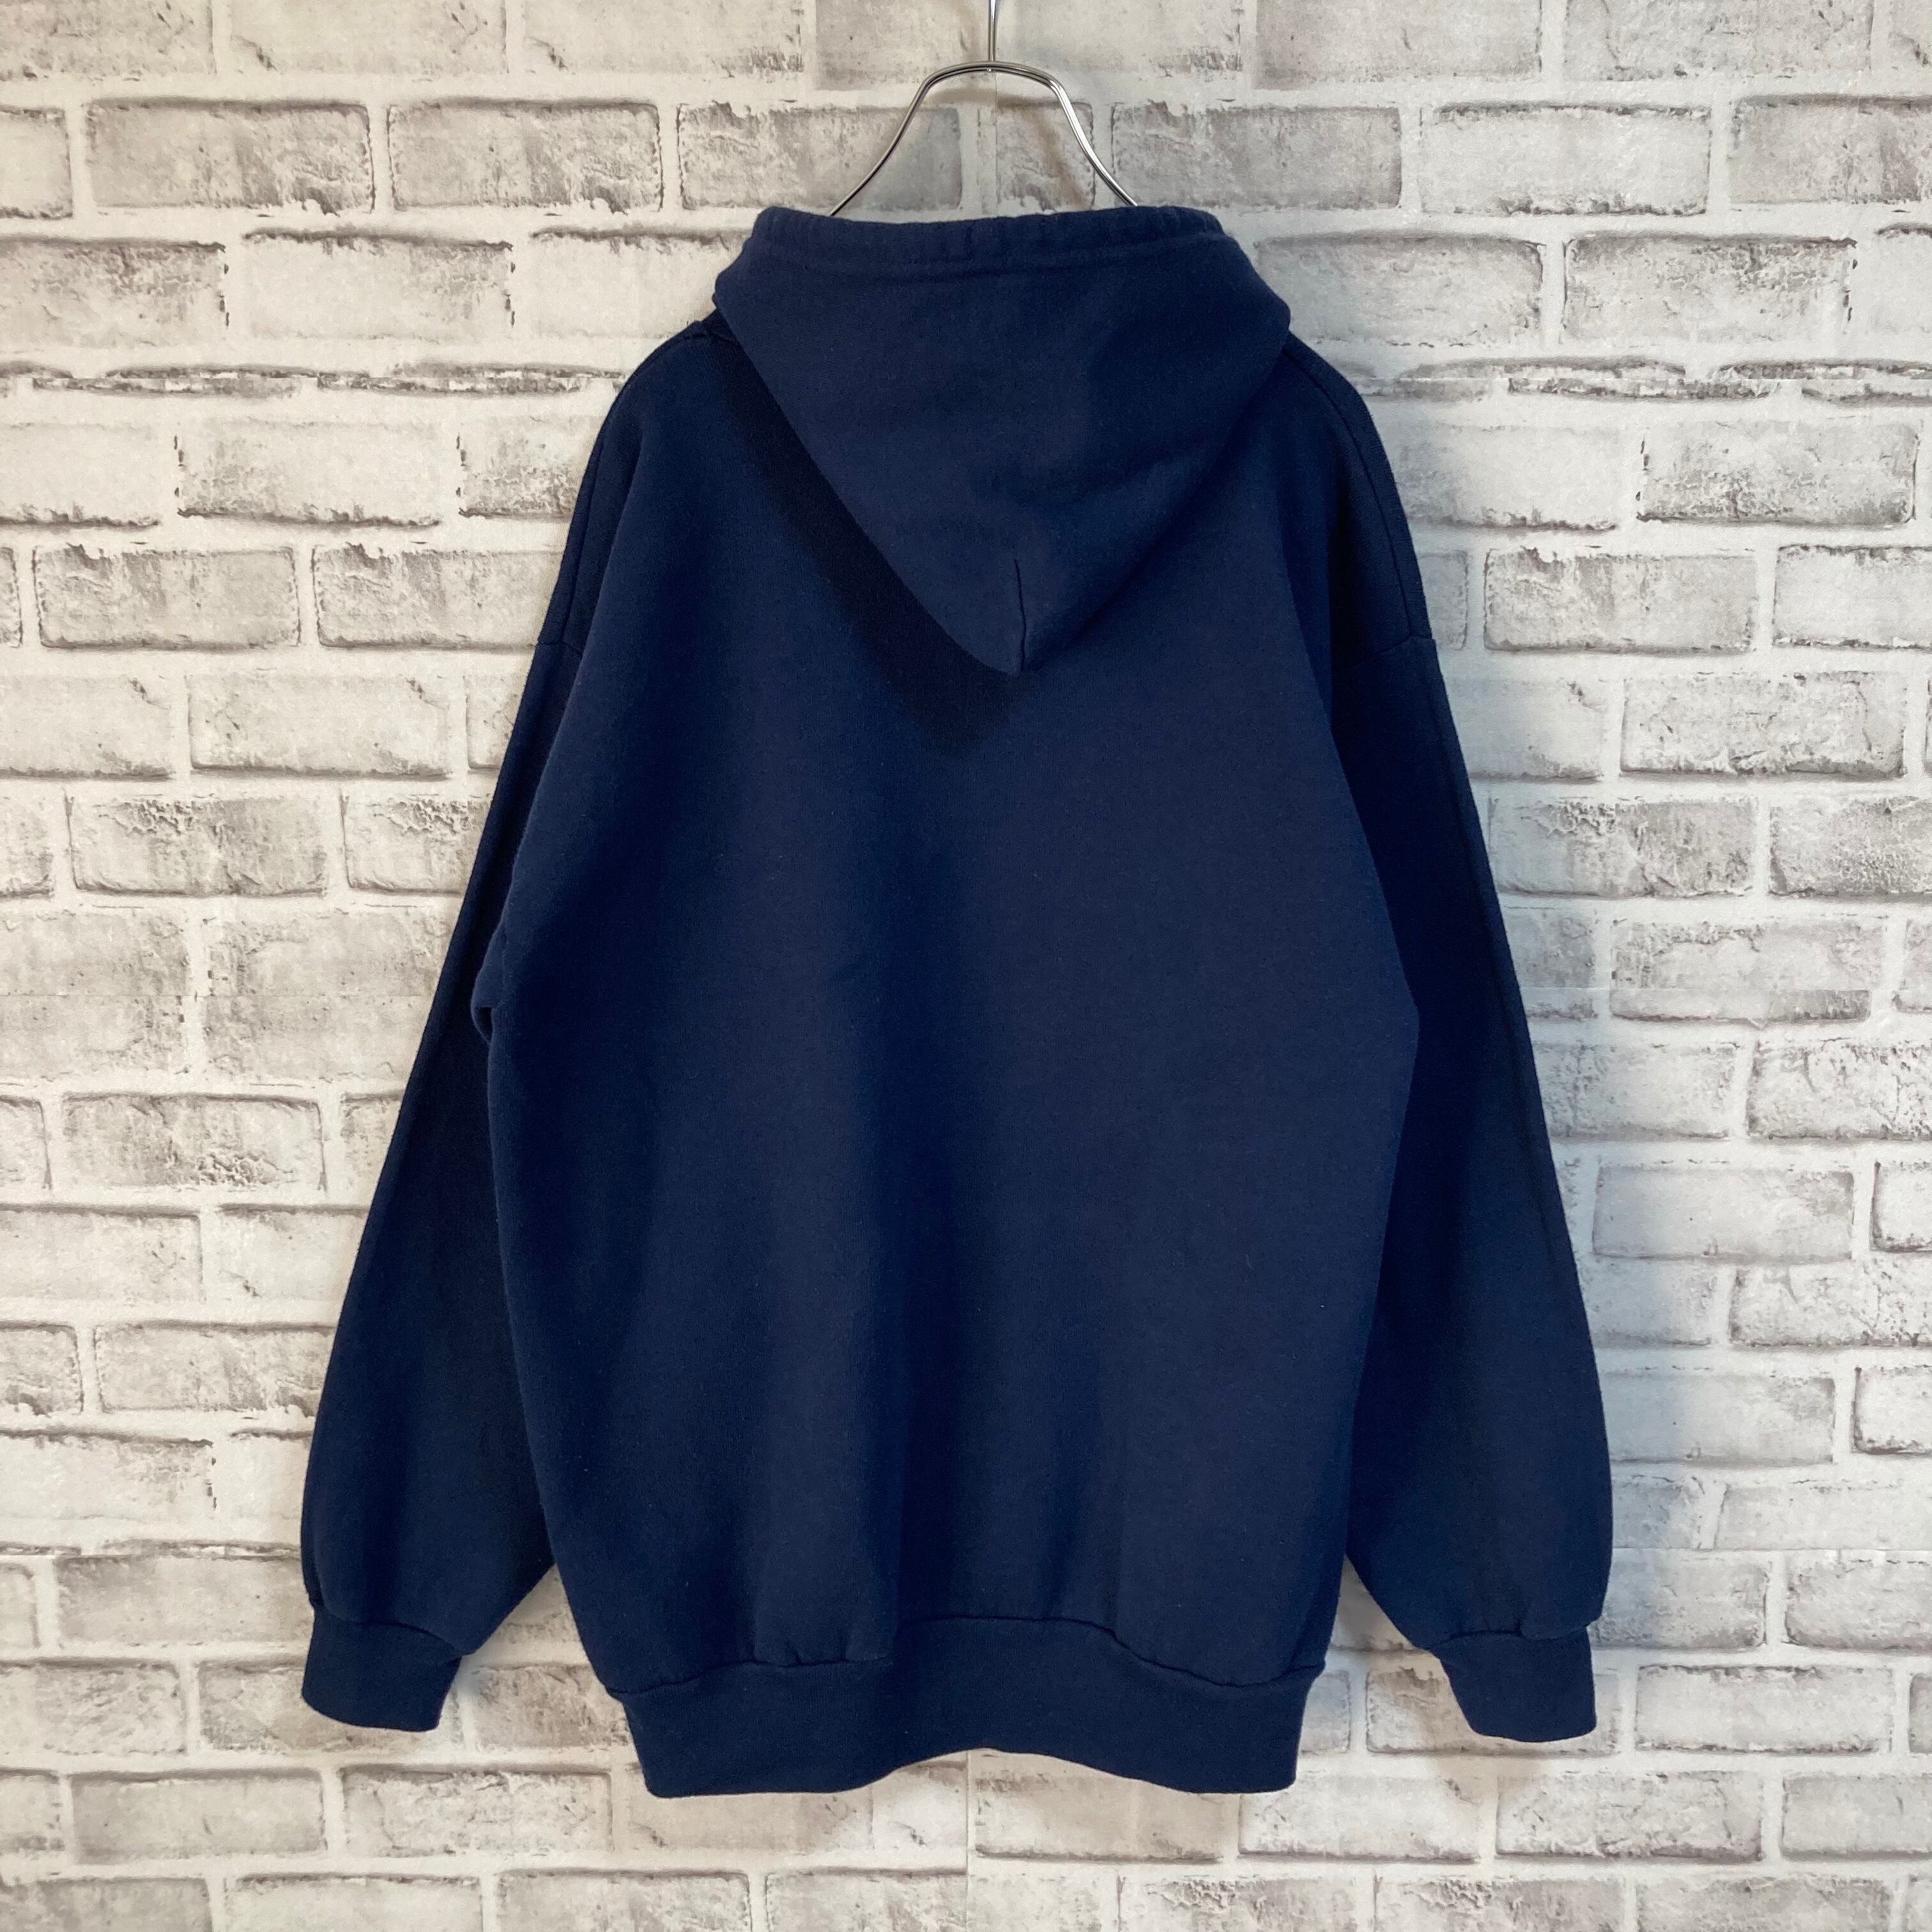 【AMERICAN KNIT WEAR】Pullover Hoodie L Made in USA 90s “Great Seal of the  United States” プルオーバーパーカー アメリカ国章 フーディ センターロゴ 刺繍ロゴ アメリカ USA 古着